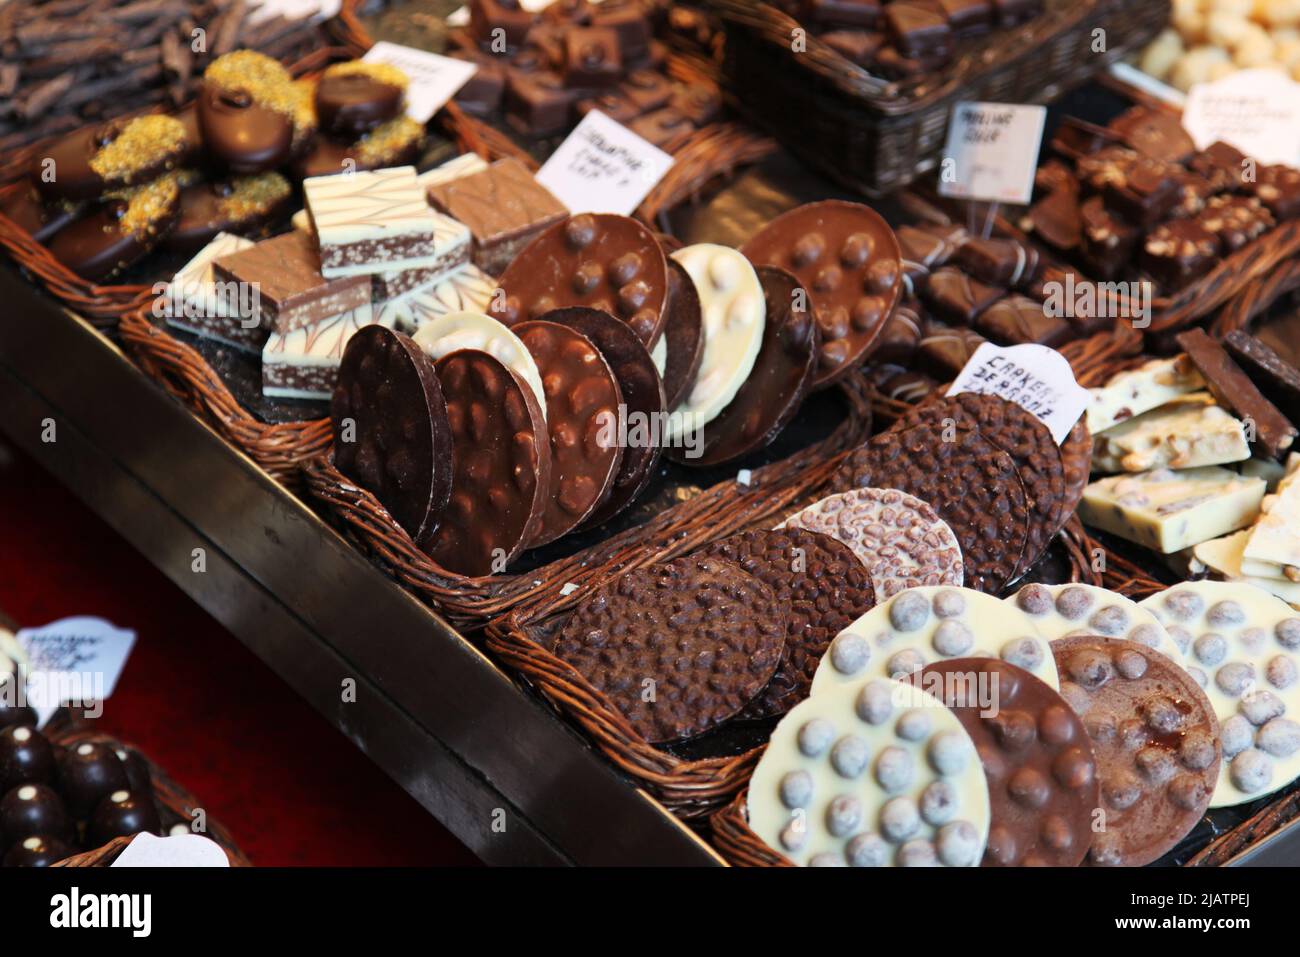 Various types of chocolate delicacies for sale Stock Photo